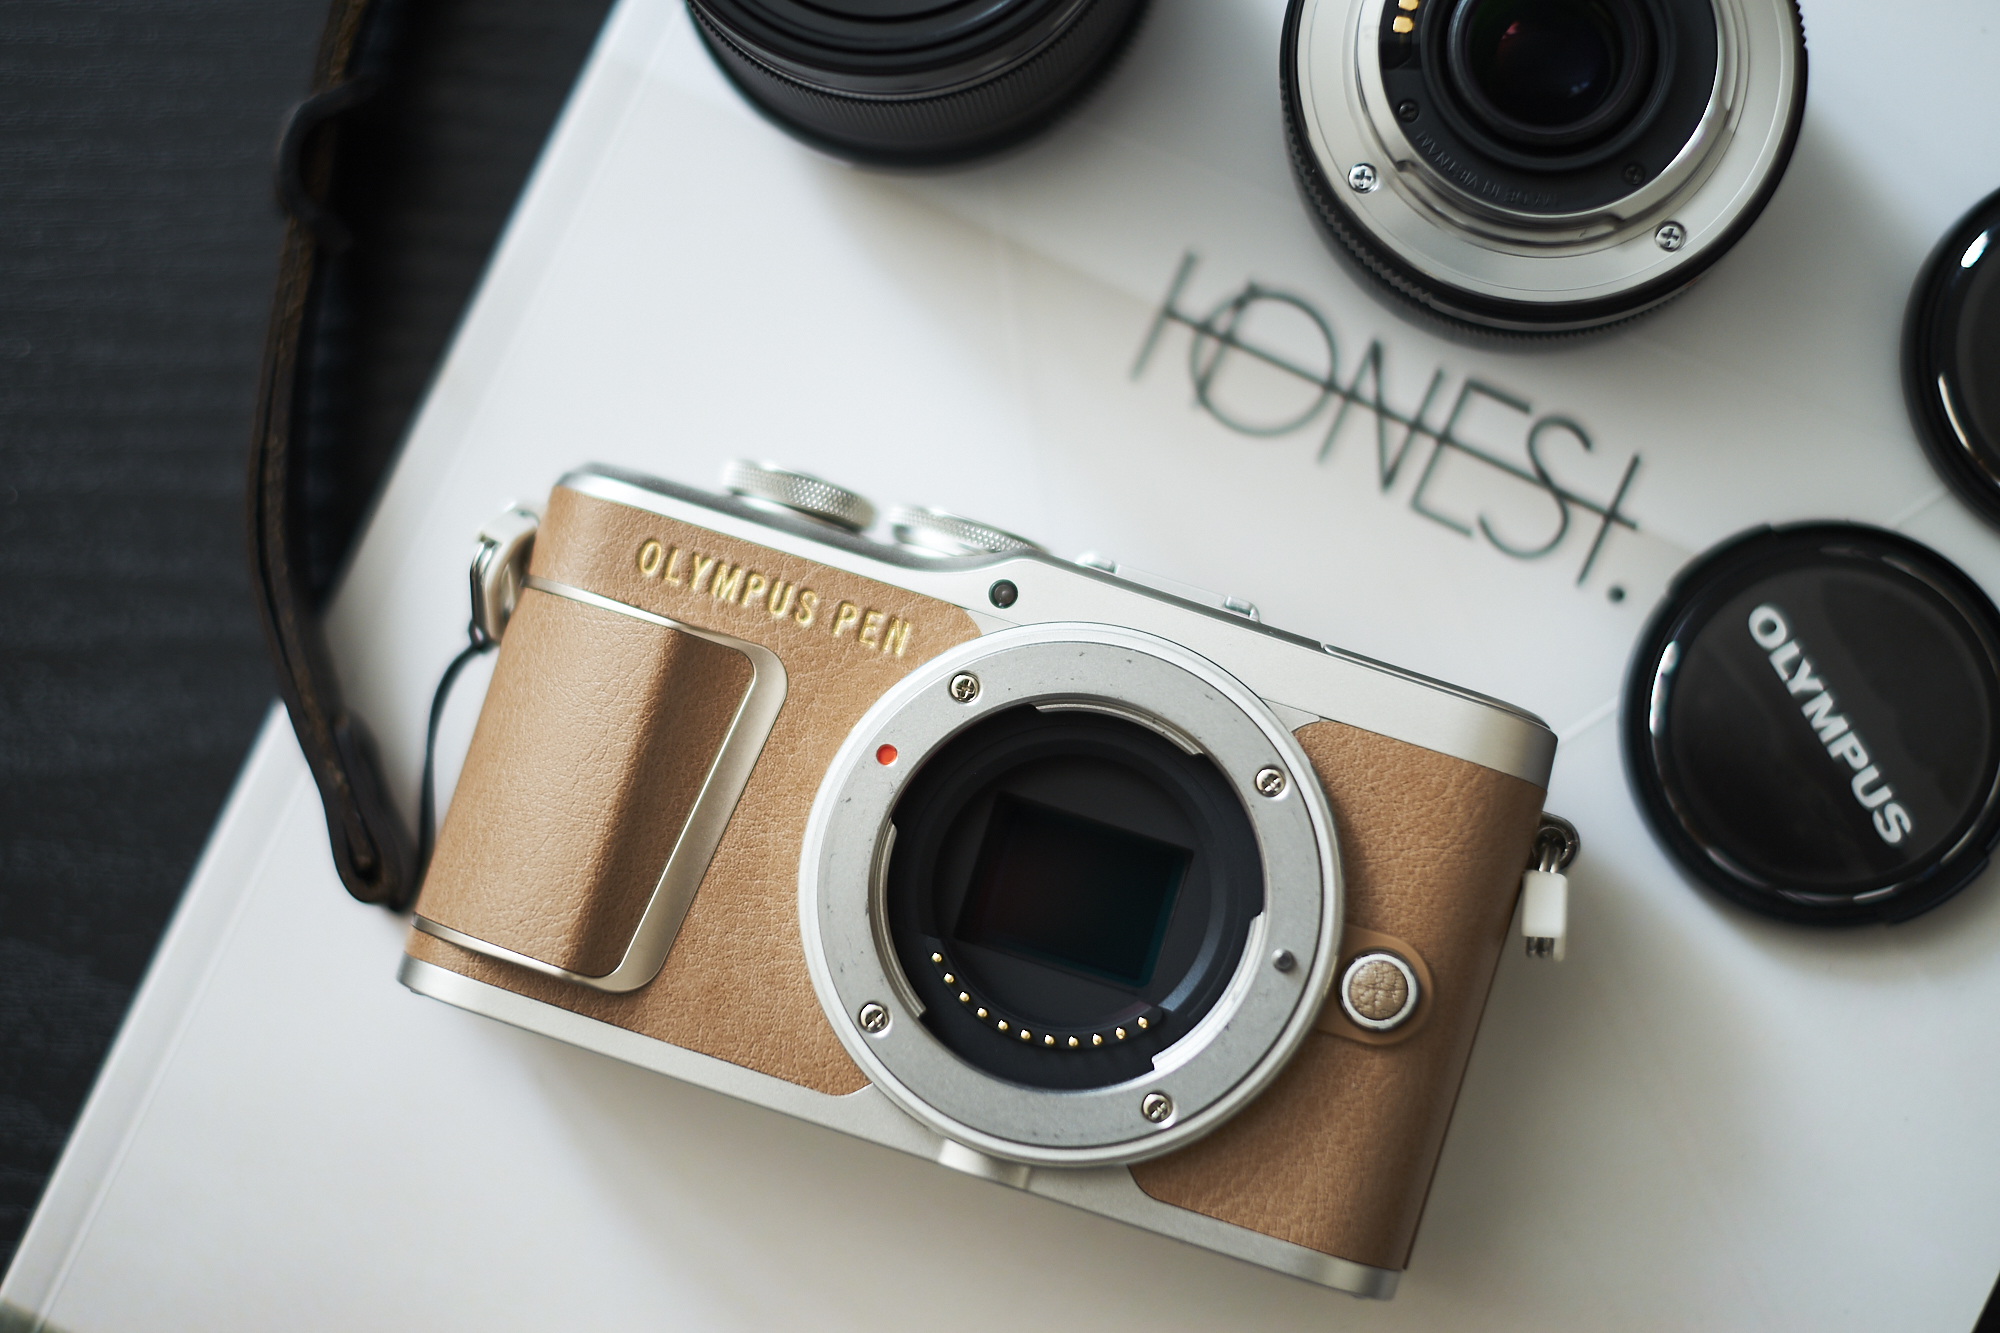 Review: Olympus EPL9 (Why and How I Fell Back in Love With